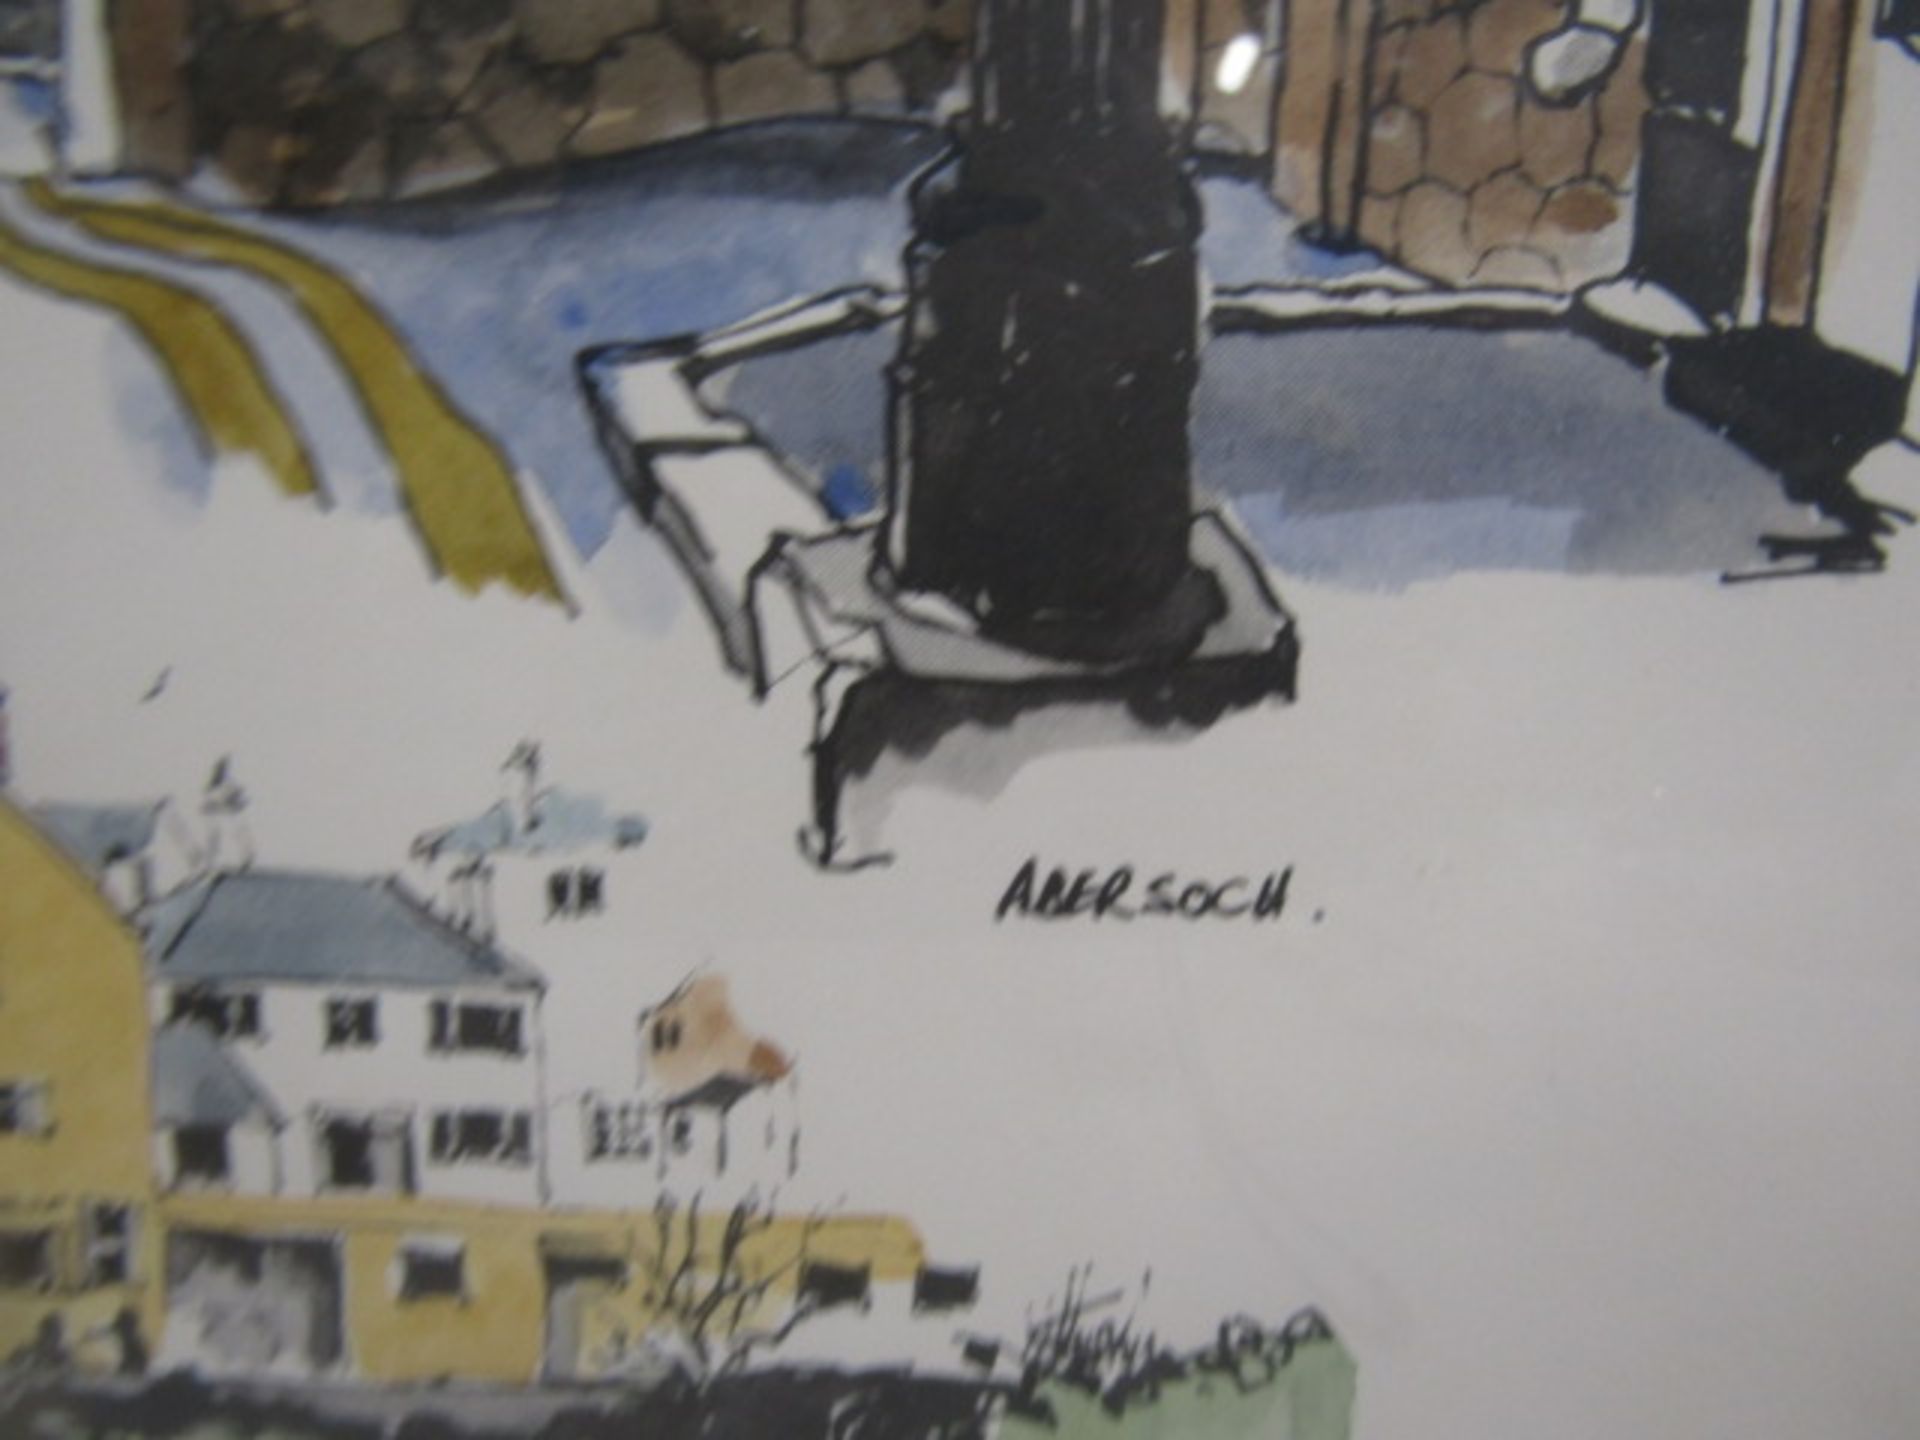 Abersoch ltd edition print and 2 others - Image 7 of 9